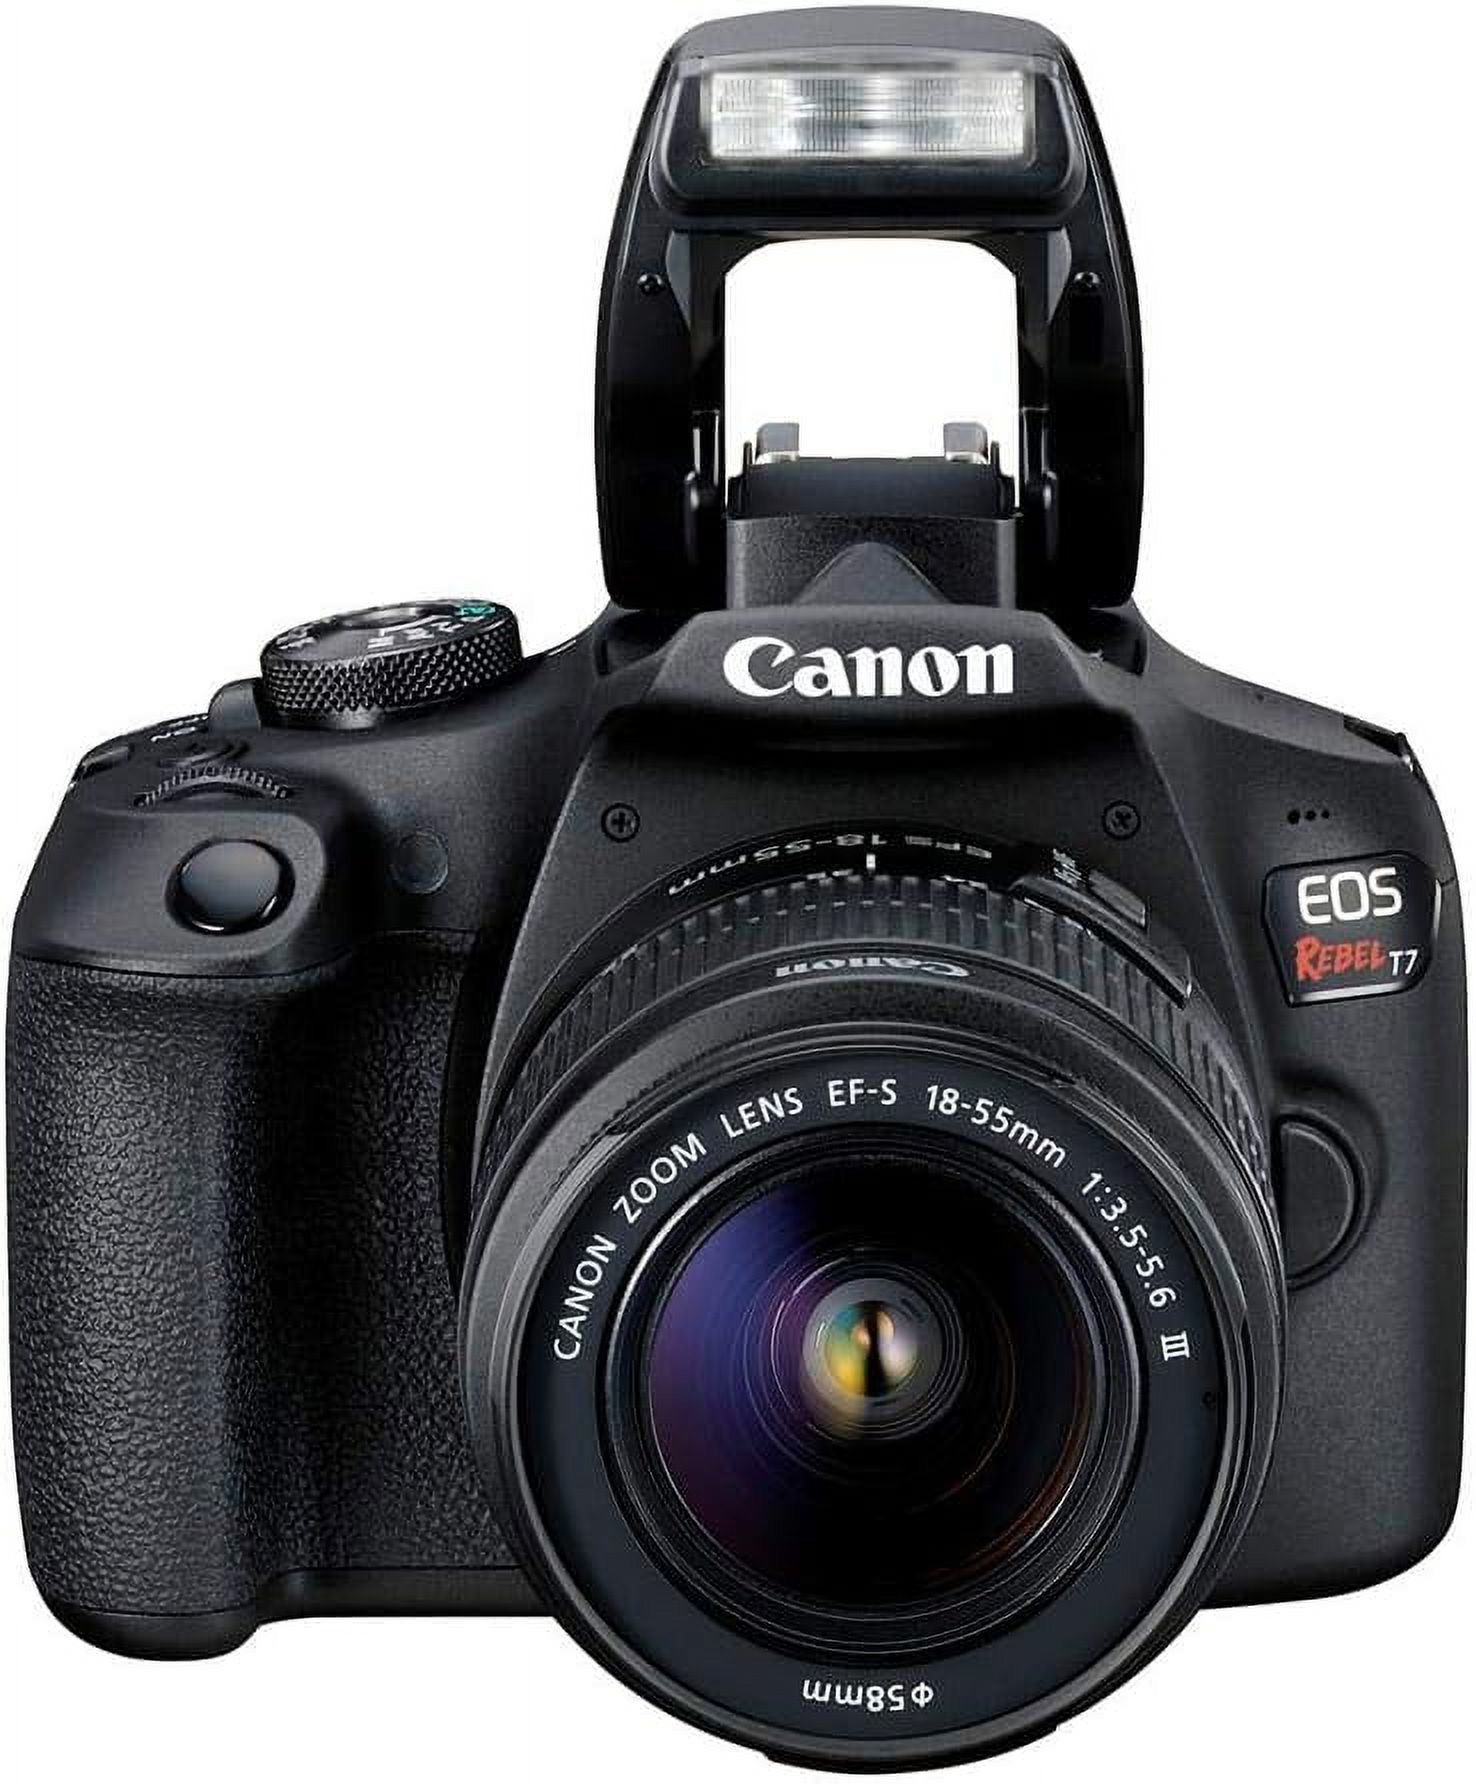 Canon EOS Rebel T7 DSLR Camera with 18-55mm Lens, Wi-Fi and Accessories: Bag, 64GB Card and More (New) - image 2 of 6